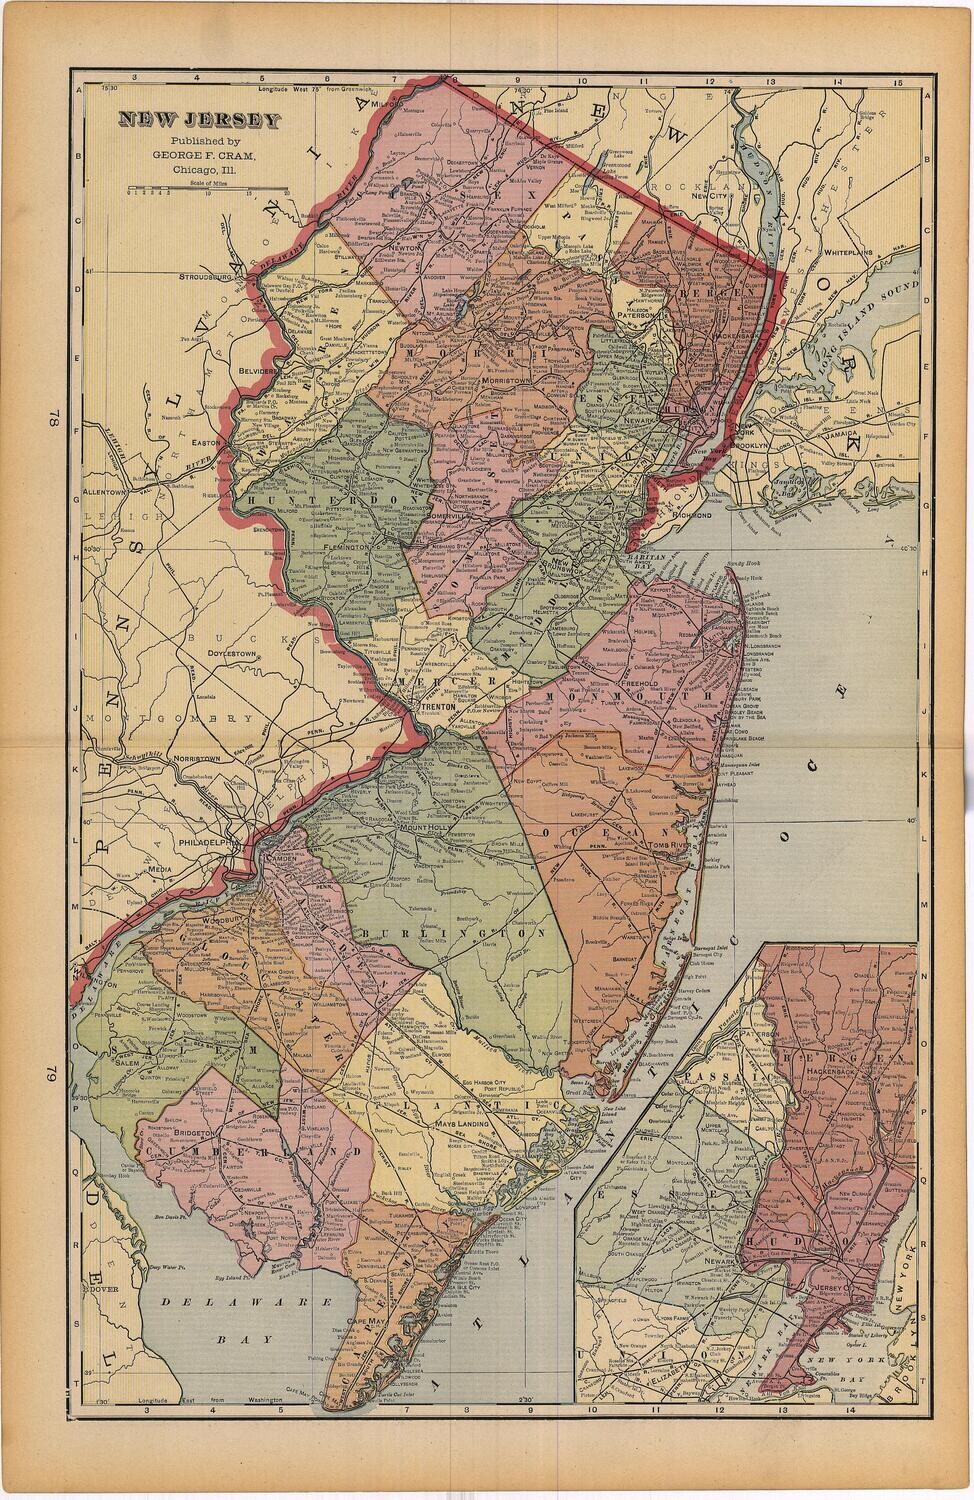 1903 Map of New Jersey by Geo.Cram in Color Lithography